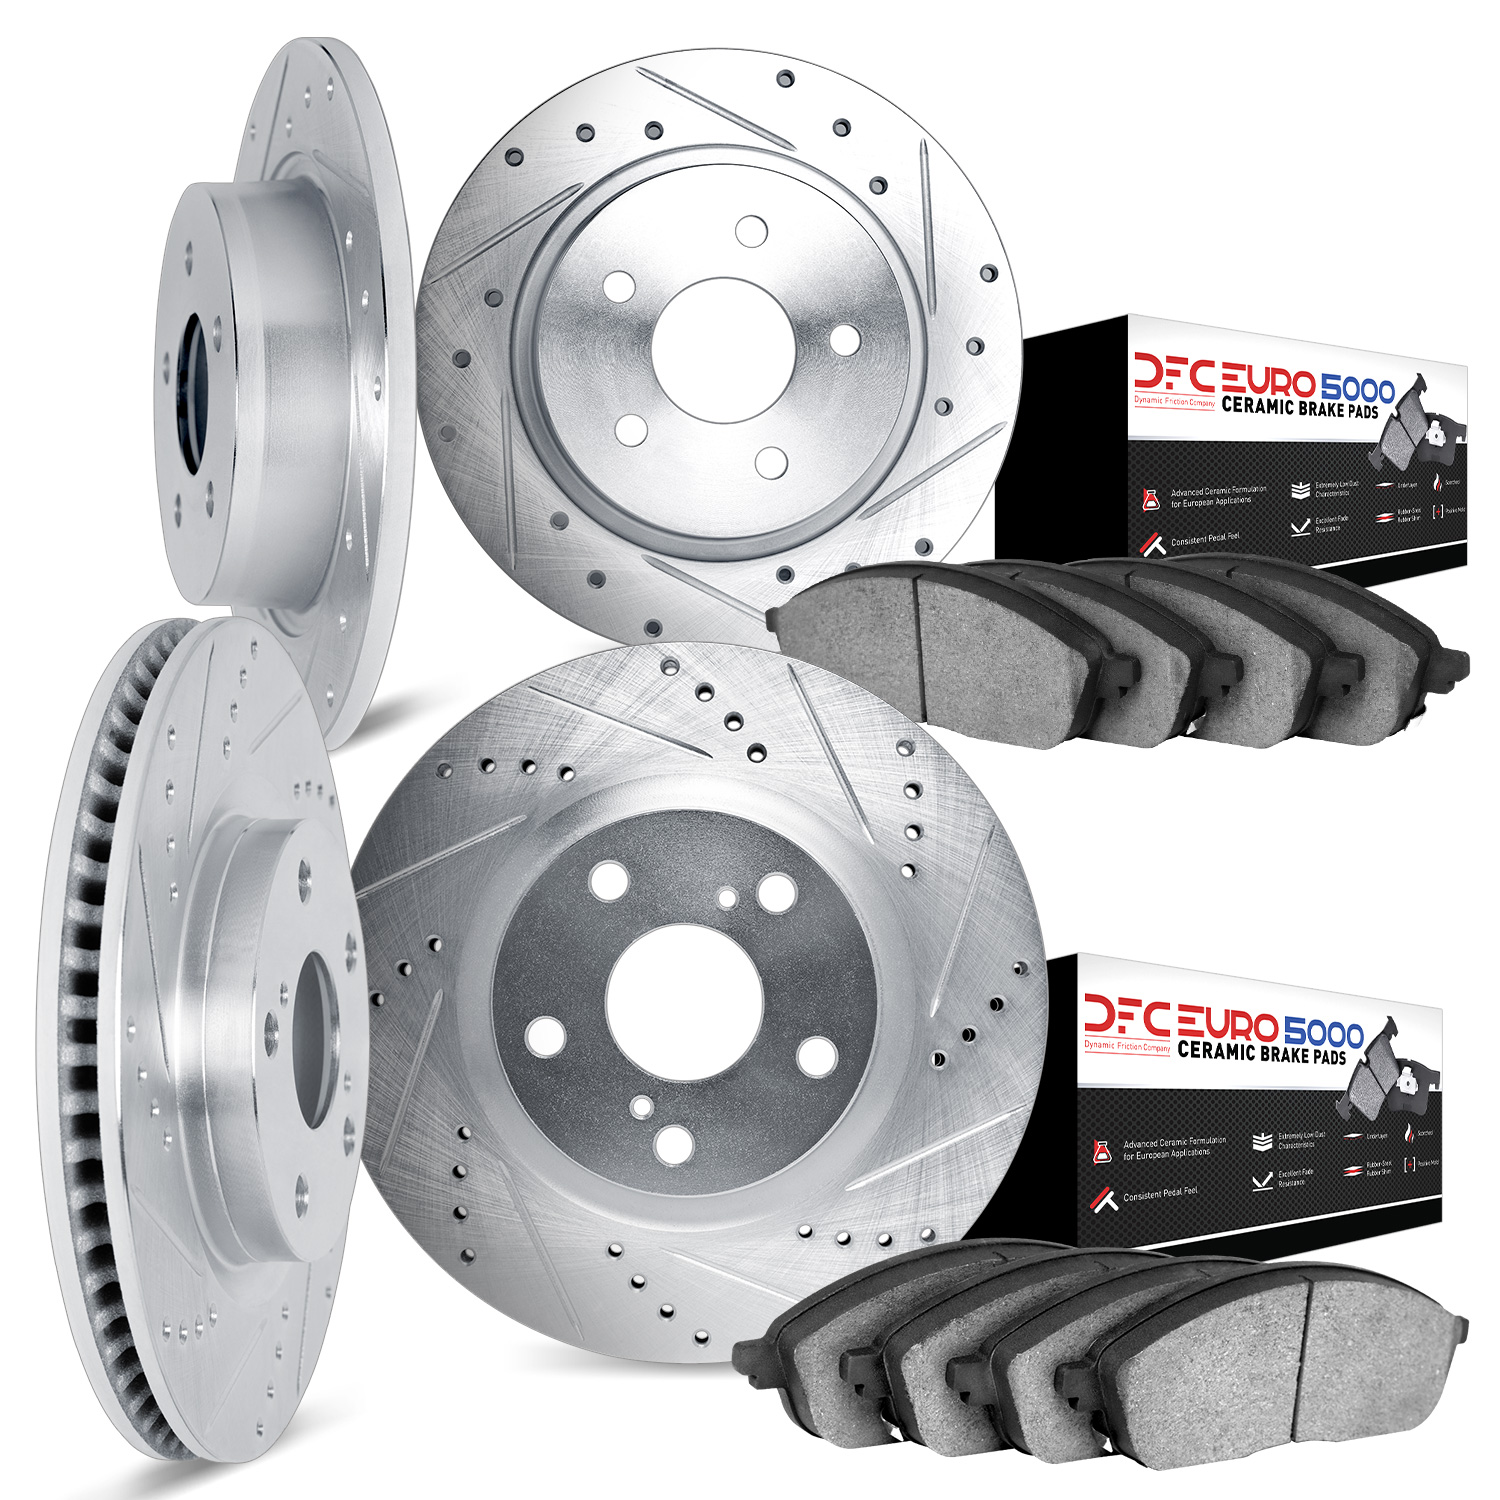 7604-92000 Drilled/Slotted Brake Rotors w/5000 Euro Ceramic Brake Pads Kit [Silver], 2006-2007 BMW, Position: Front and Rear